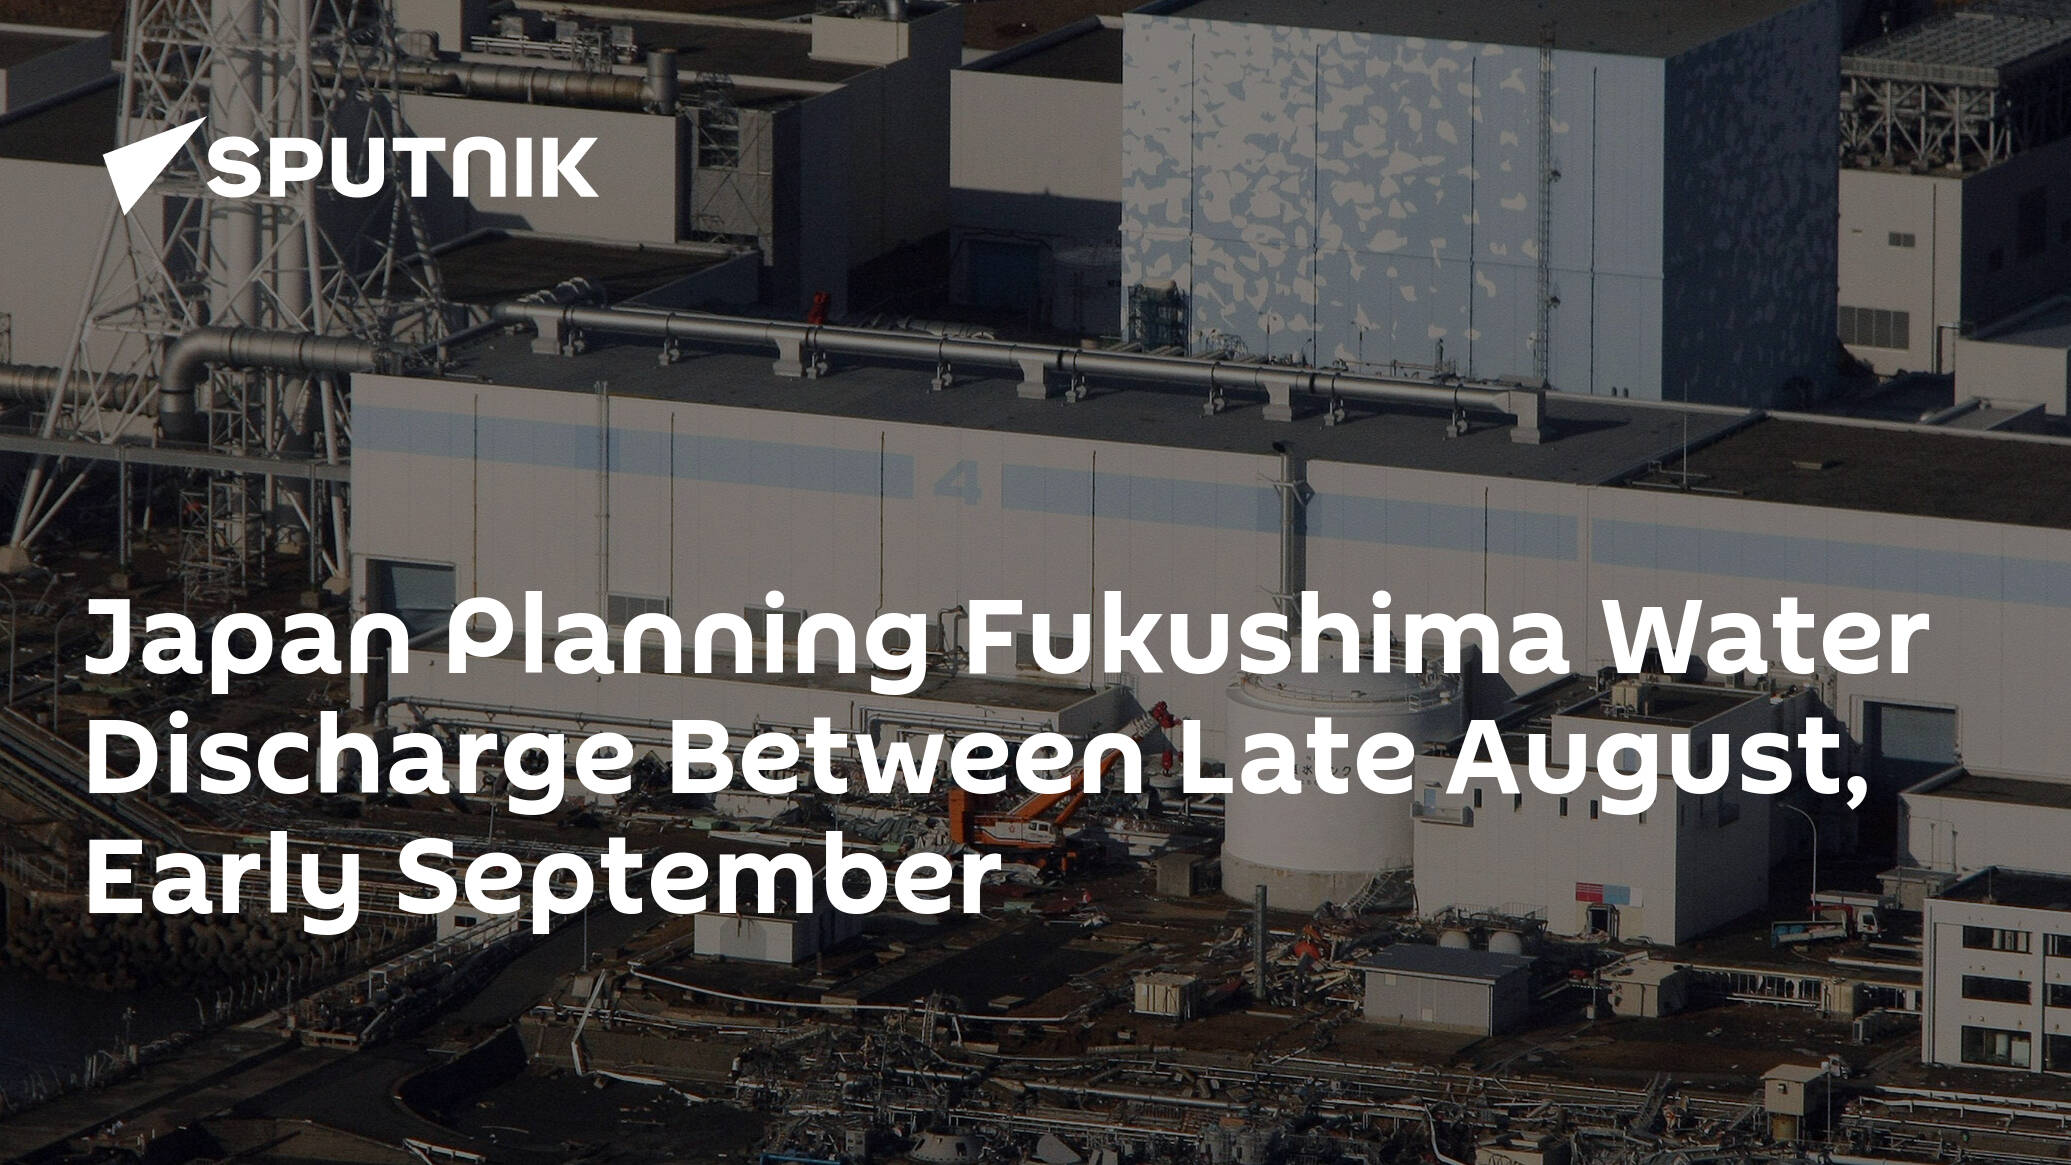 Japan Planning Fukushima Water Discharge Between Late August, Early September